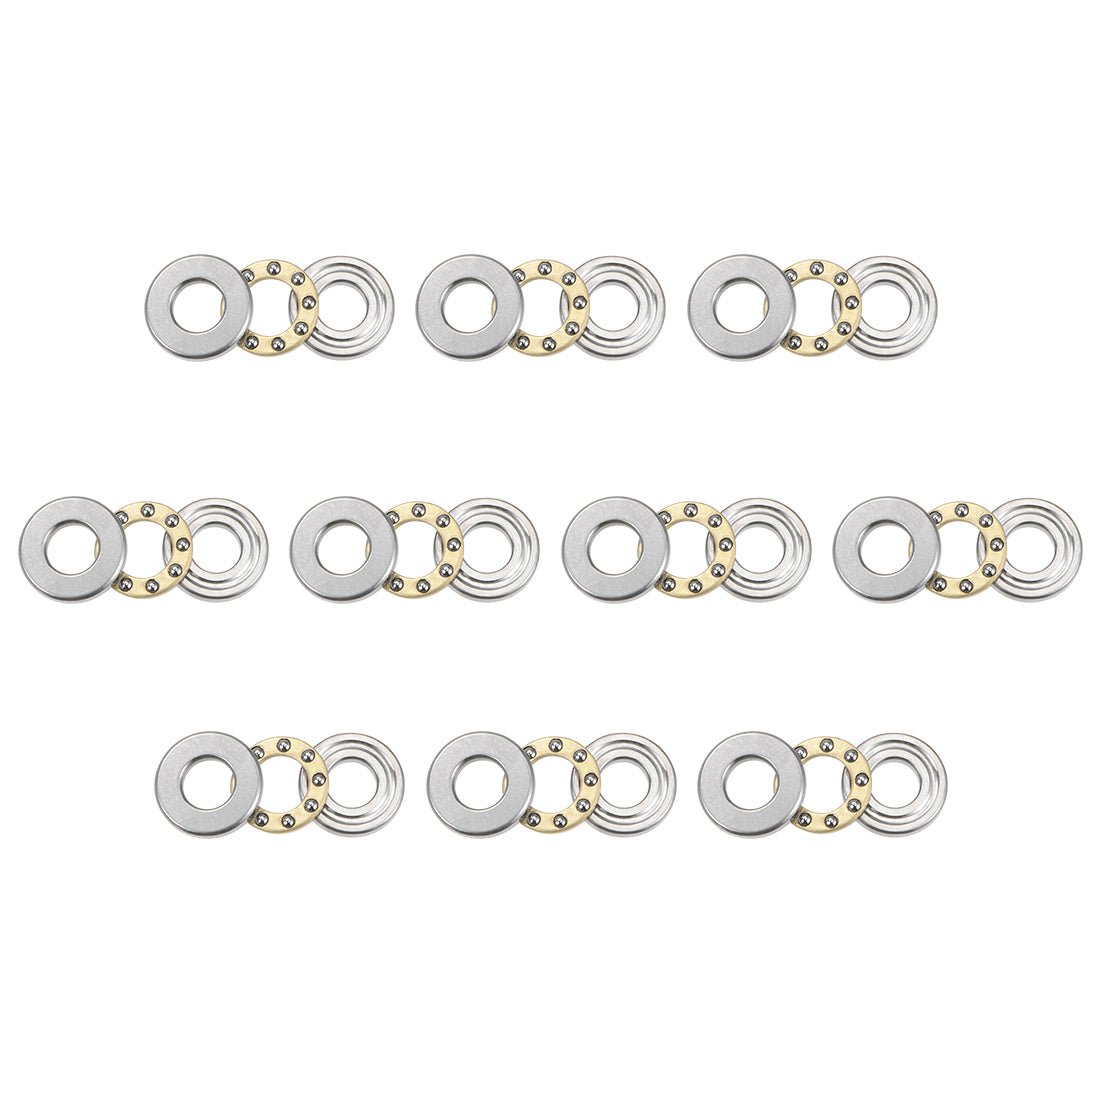 uxcell Uxcell F5-11M Miniature Thrust Ball Bearing 5x11x4.5mm Chrome Steel with Washer 10Pcs